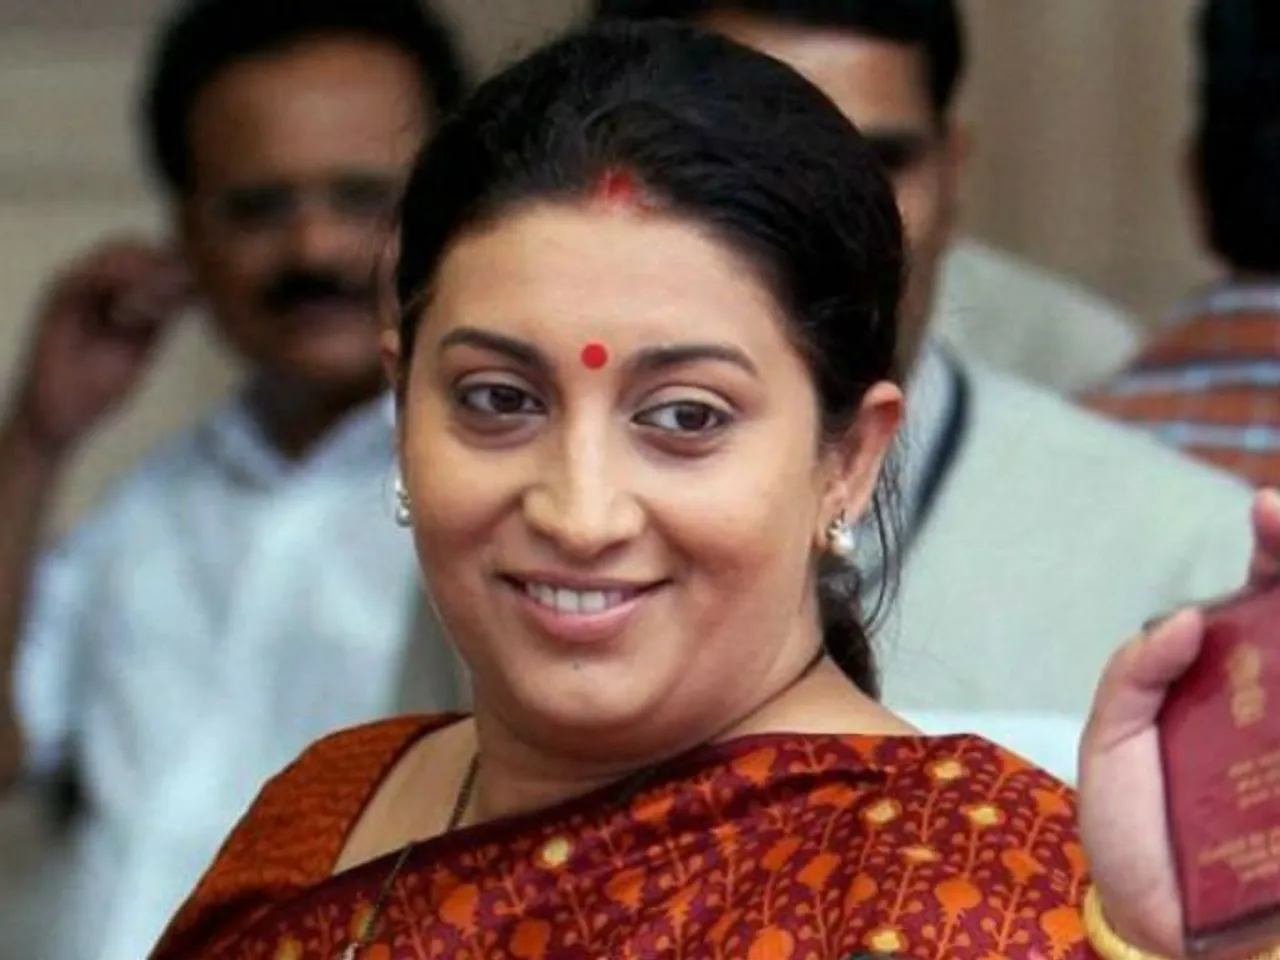 Union Minister Smriti Irani files FIR after being followed by men in car